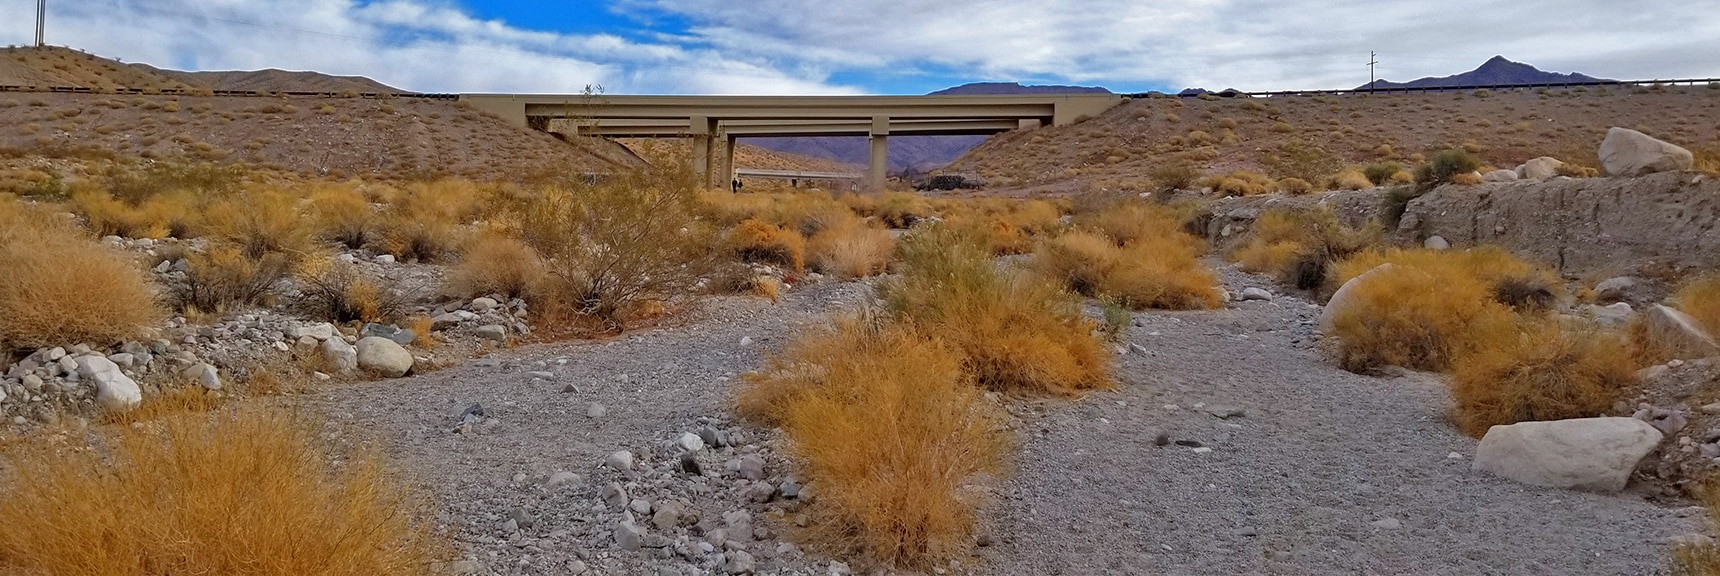 Just Crossed Under the Highway 93 Bridge Over White Rock Canyon | Arizona Hot Spring | Liberty Bell Arch | Lake Mead National Recreation Area, Arizona